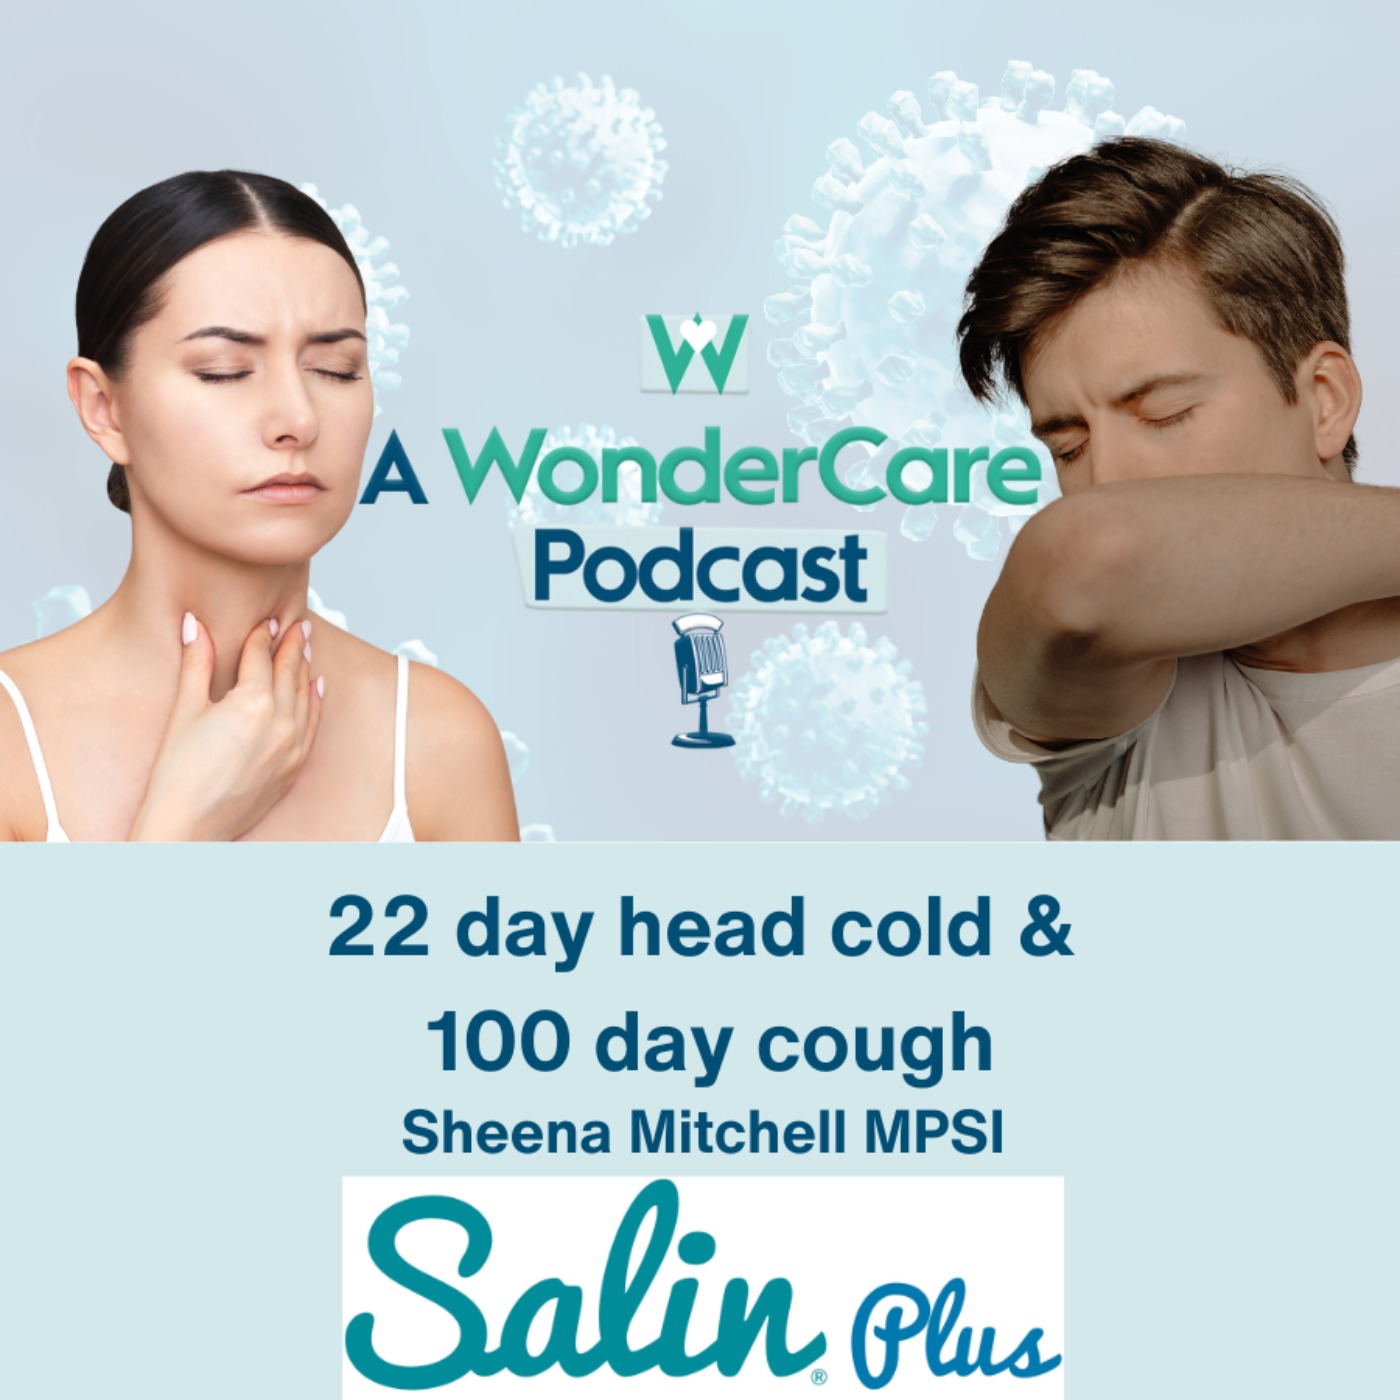 22 day head cold and 100 day cough